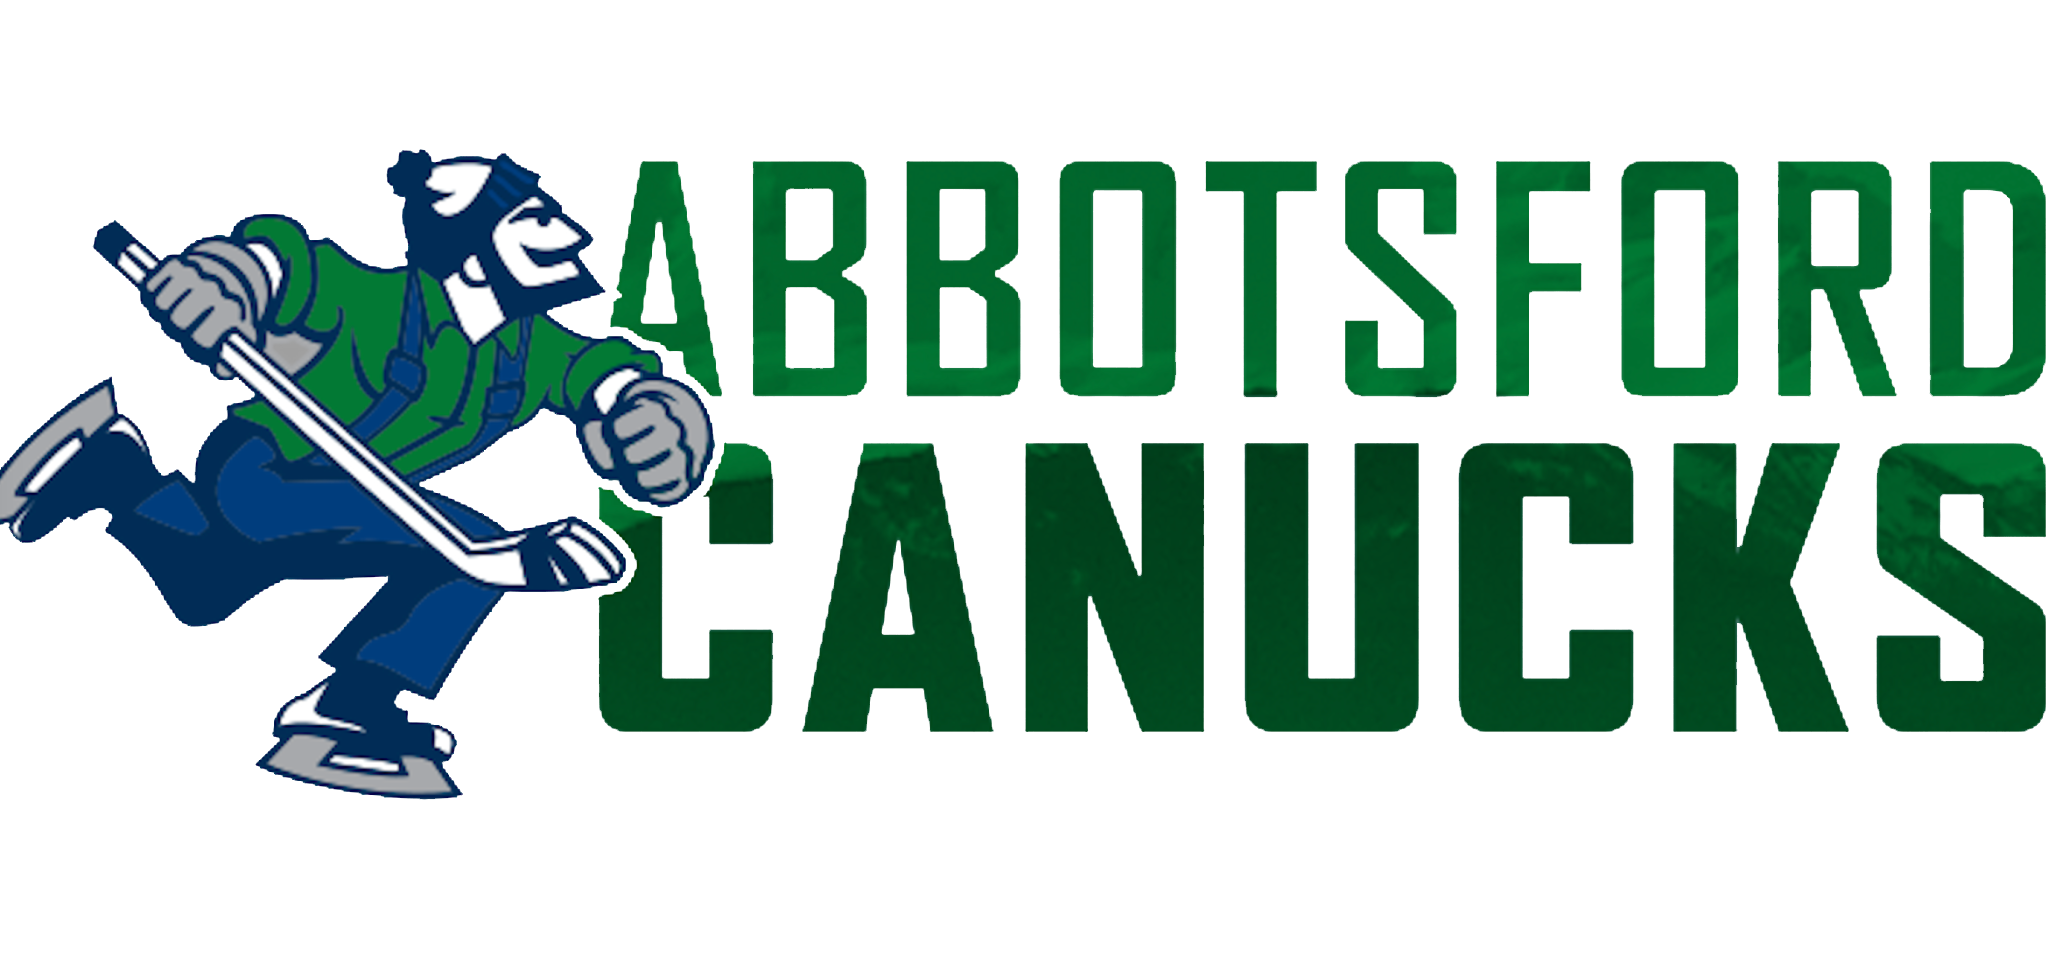 Abbotsford Canucks logo with text